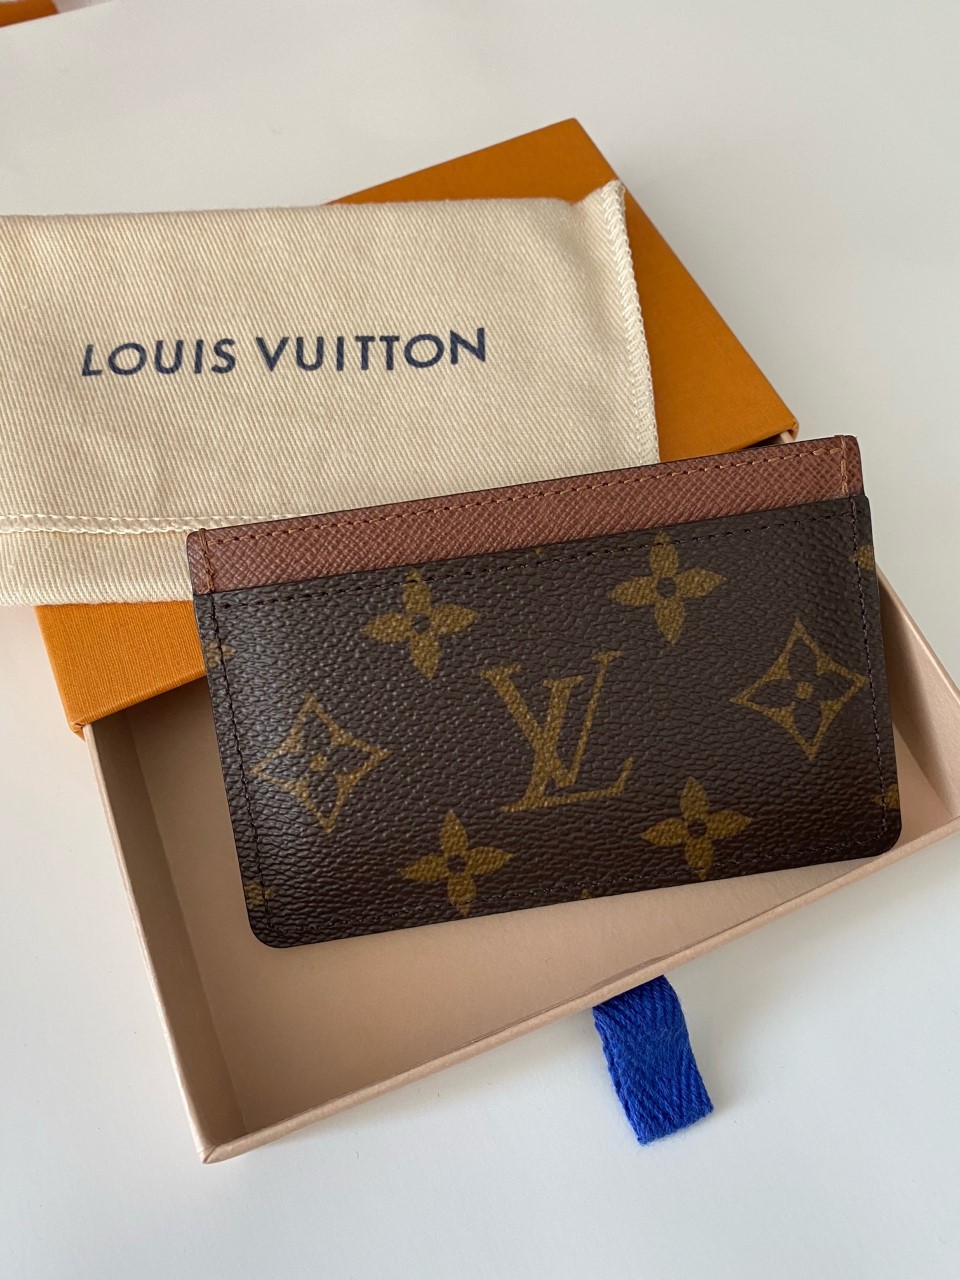 HighendSociety Louis Vuitton Card Holder review